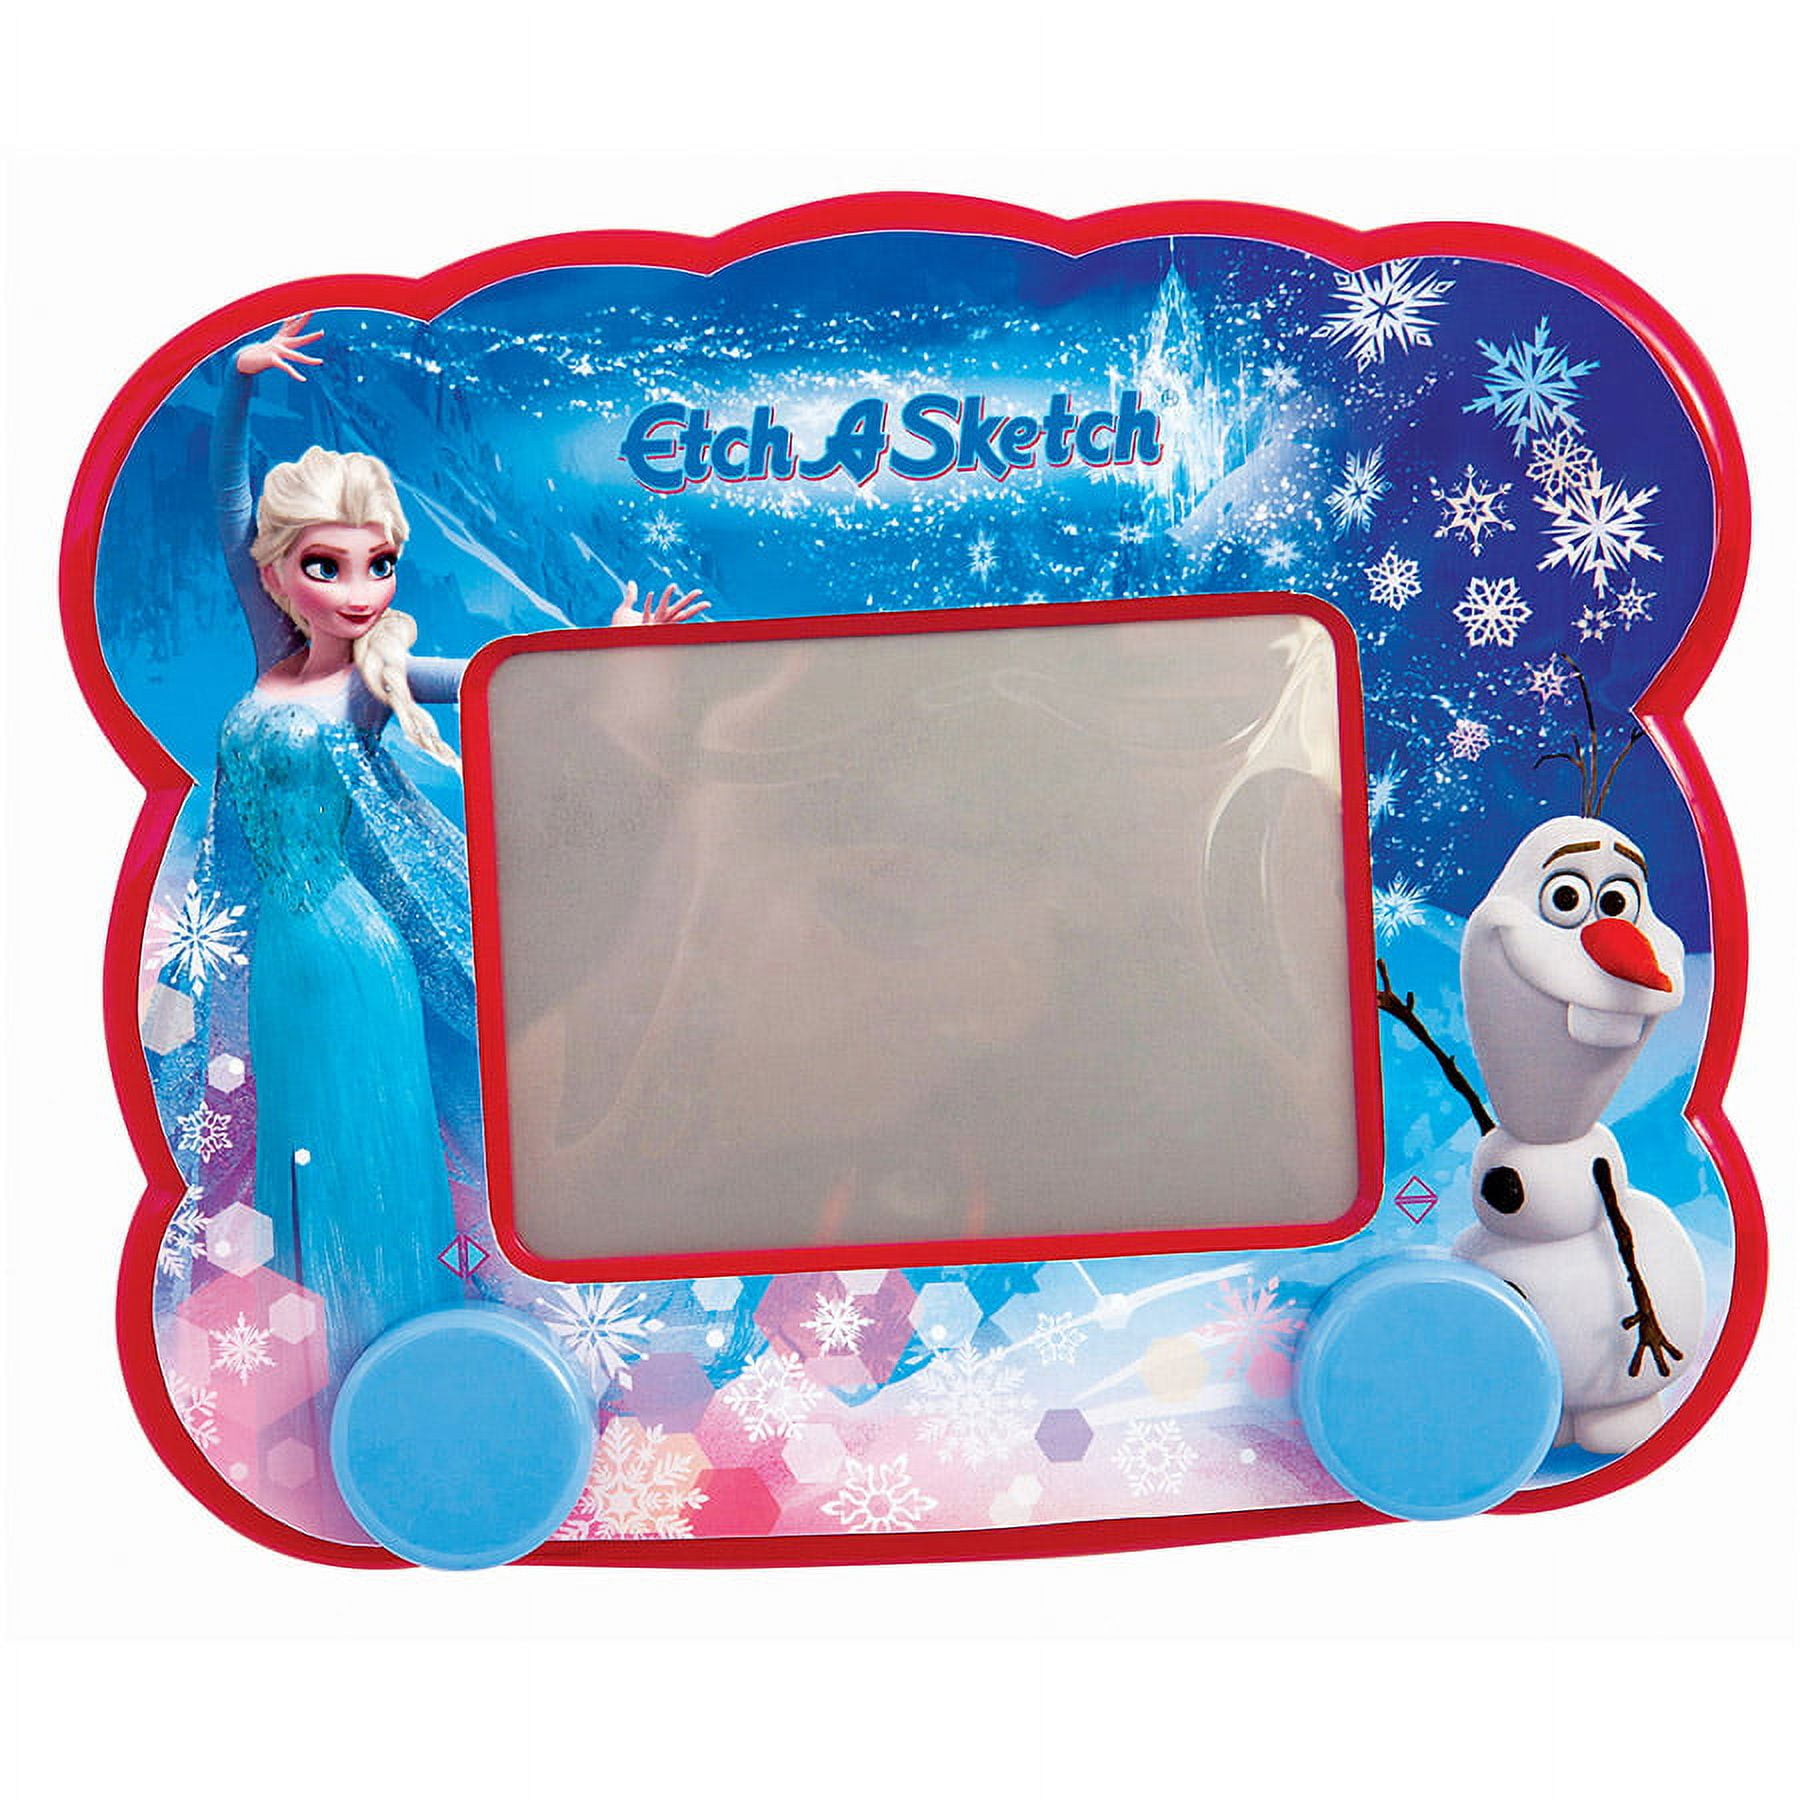 Original Etch A Sketch - A2Z Science & Learning Toy Store